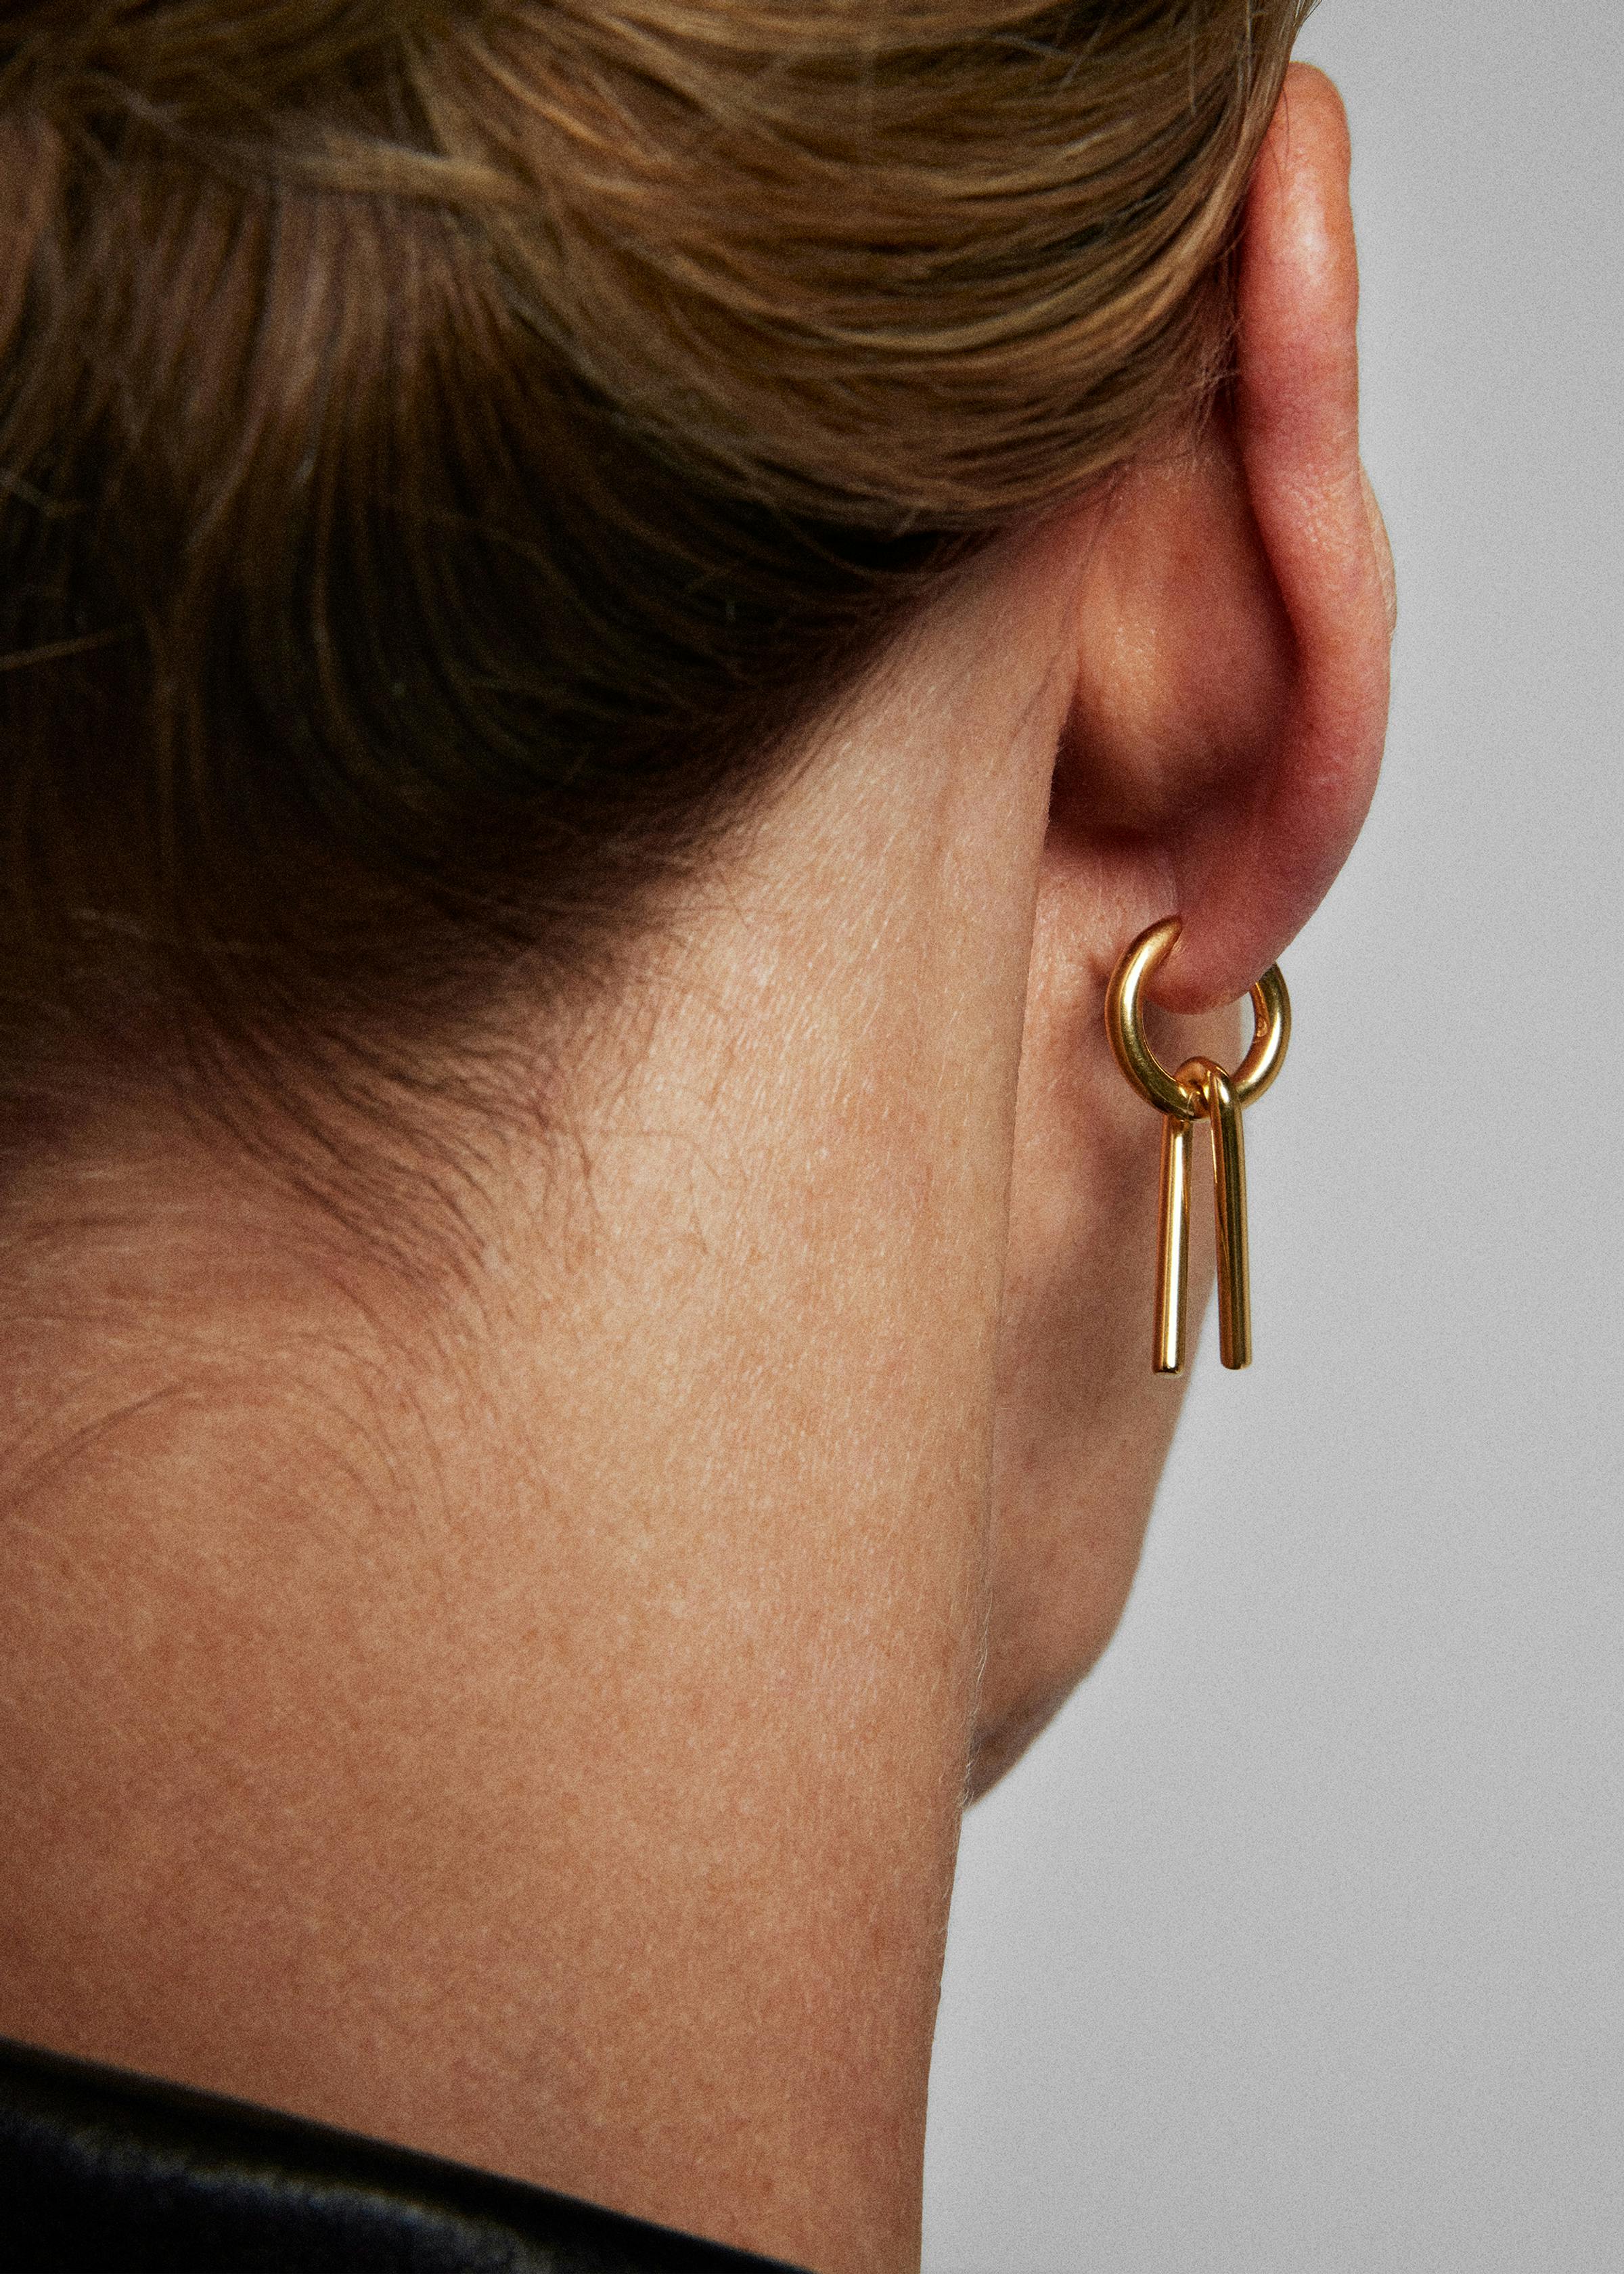 System earring clip